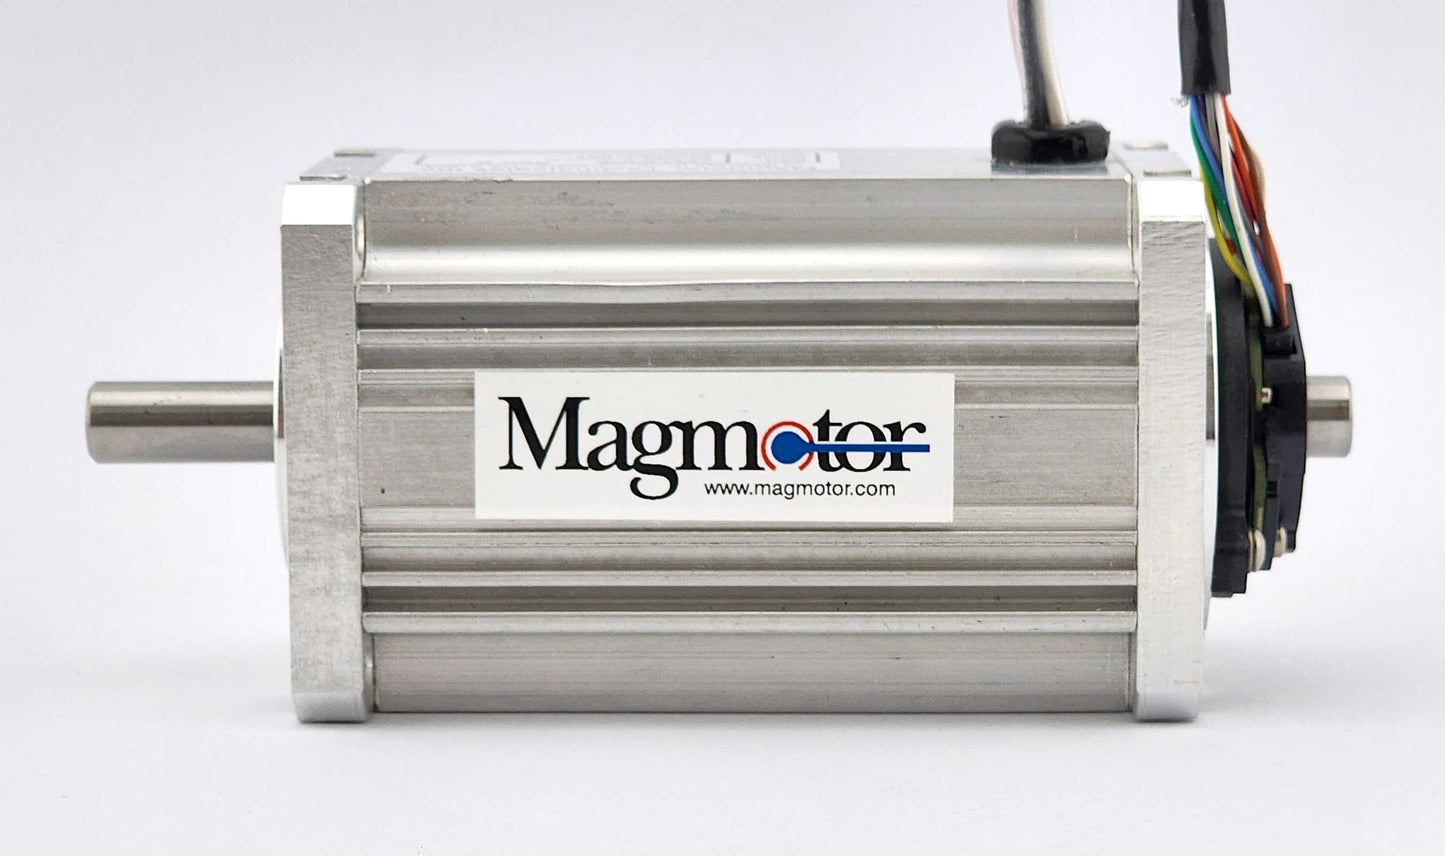 Magmotor BFA23-F-200FE 8 Pole Brushless Motor 730240058 Side View with Magmotor Label